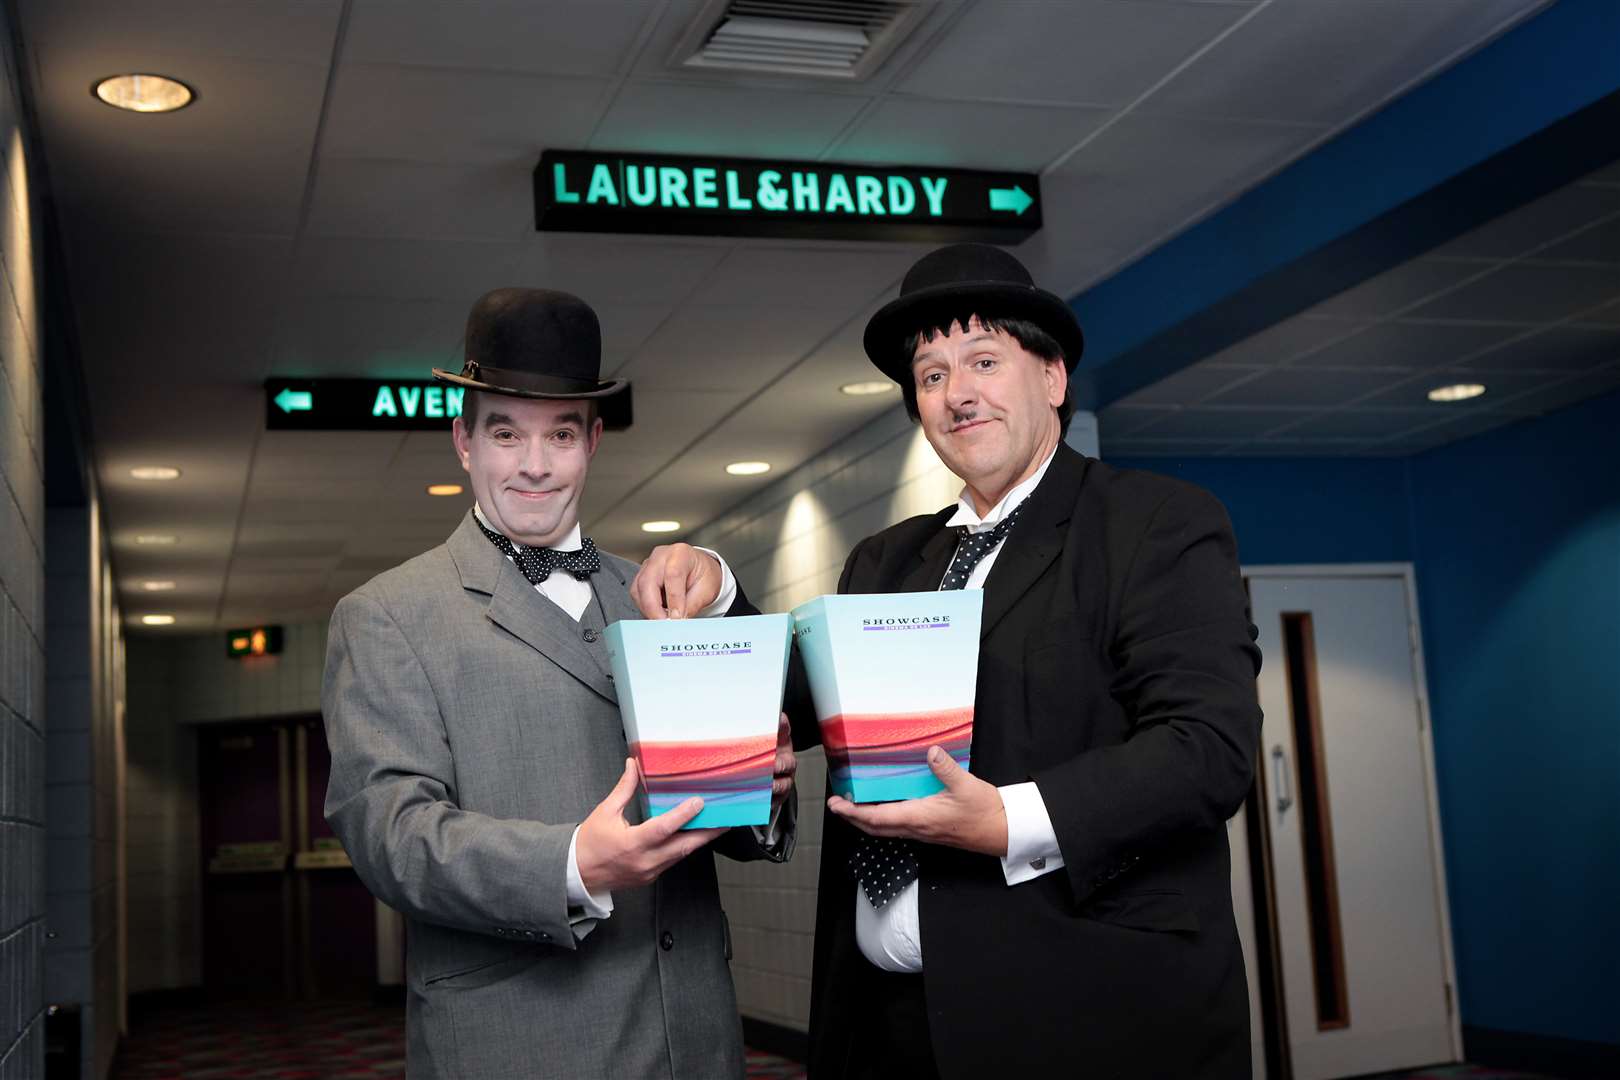 Laurel and Hardy lookalikes gathered at Showcase Cinema Liverpool to mark the launch of the screenings of a classic double bill of the comedic duo across UK cinemas.